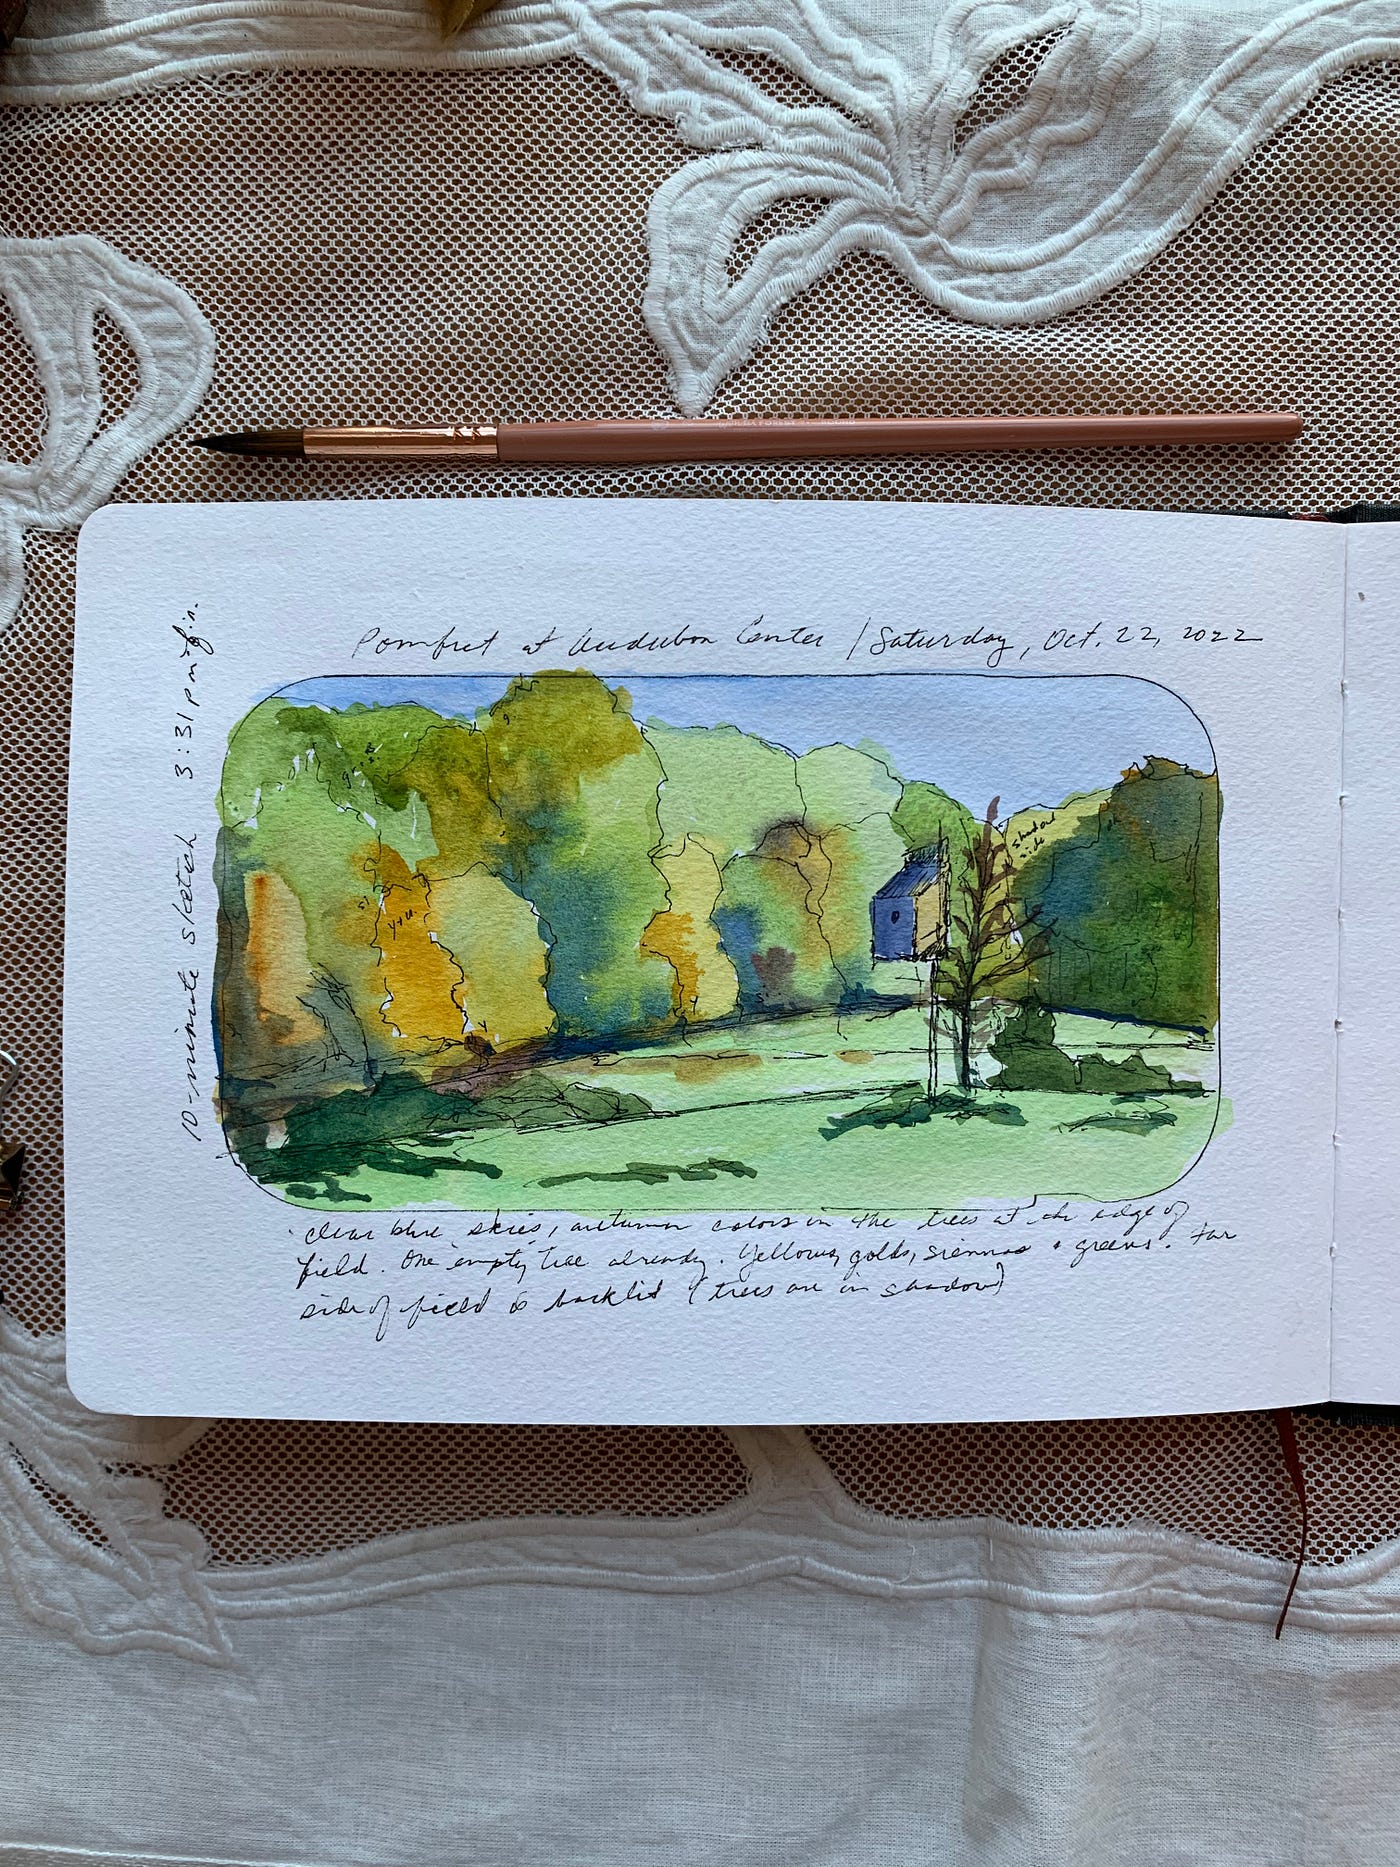 A watercolor journal entry by Roxanne Steed showing an old birdbox standing in a meadow at the Connecticut Audubon Center in Pomfret, CT. The color palette is mostly greens and yellows for the early fall. The birdbox itself is in full light on one side, blued shade on the other. The margins are filled with notes about the scene. Photo and painting by Roxanne Steed